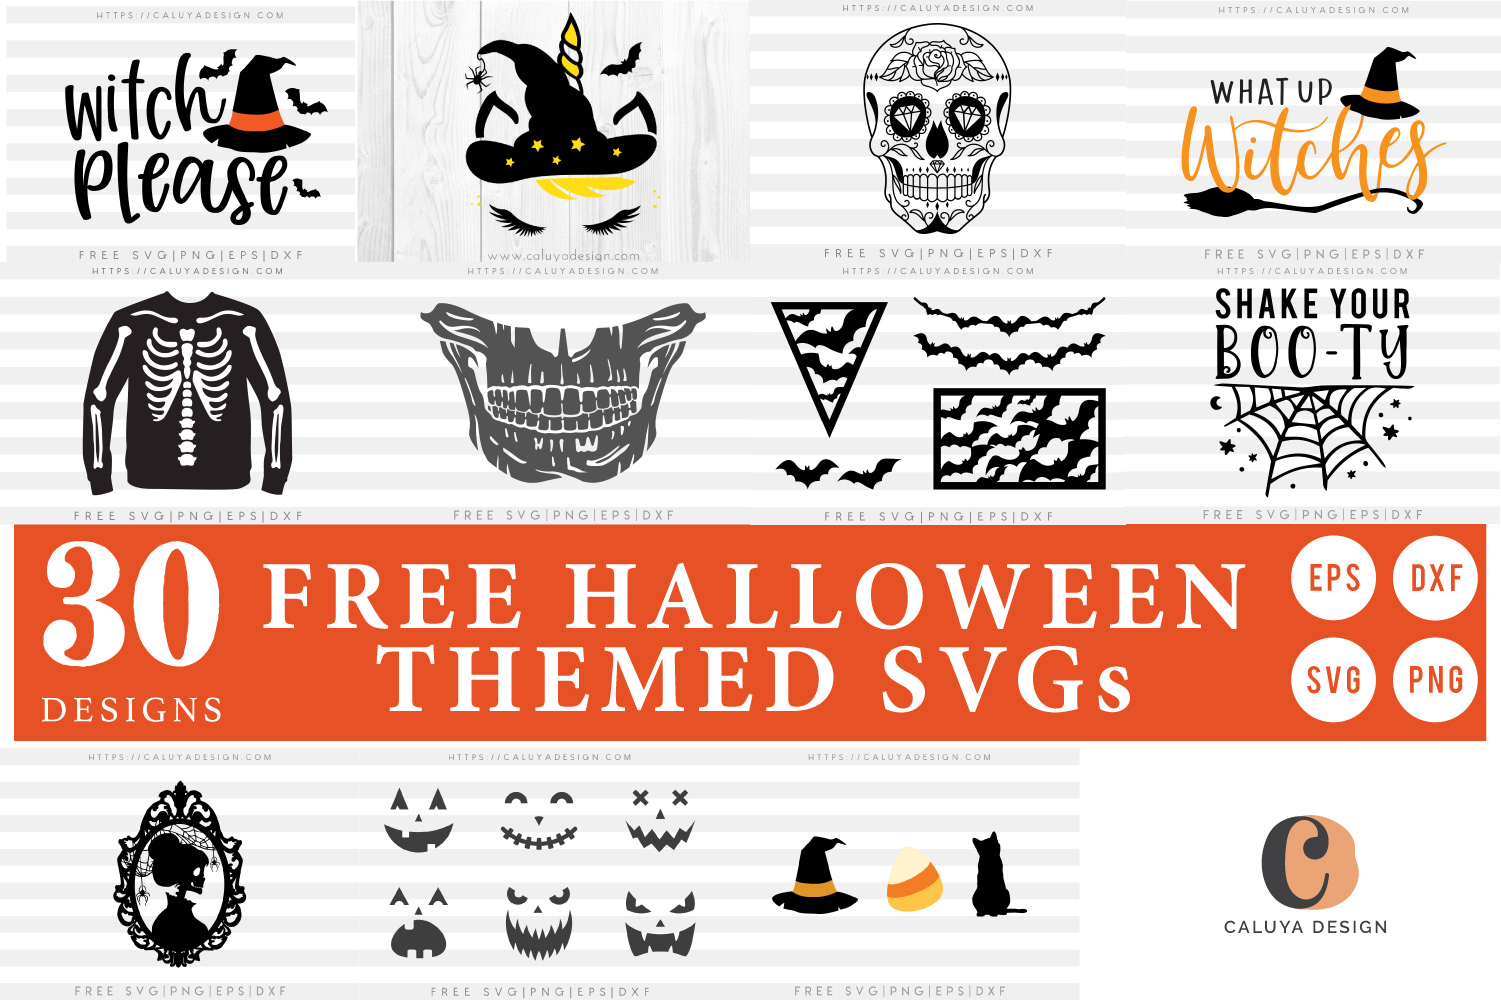 Download 30 Free Halloween Themed SVG Cut File for Cricut